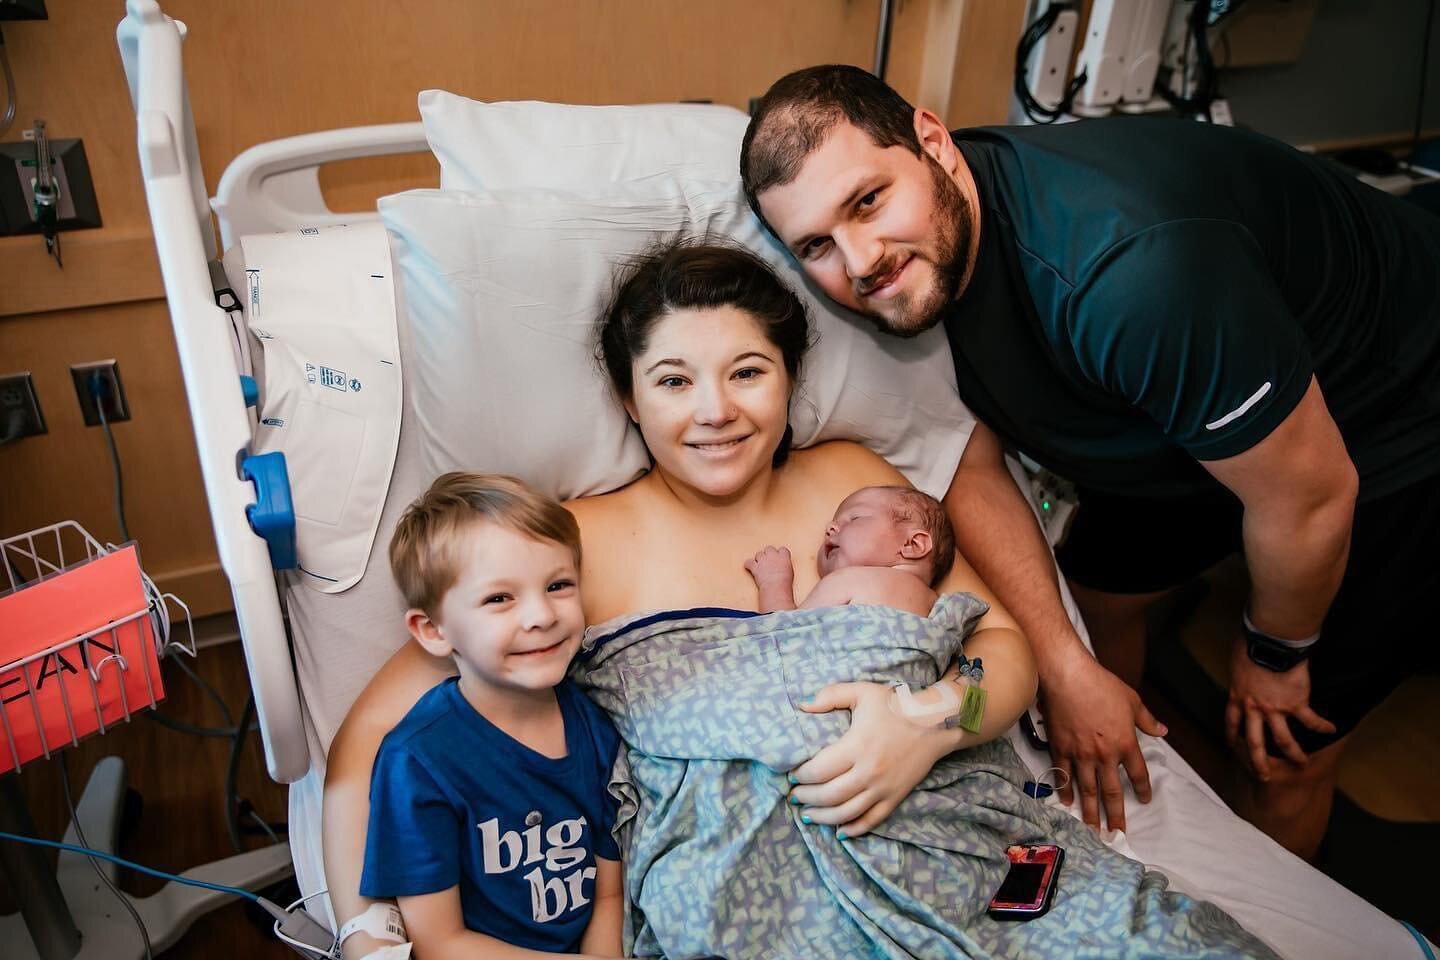 Last week, Tylyn &amp; her beautiful family welcomed her new baby boy, Ezra into the world ✨ We are so happy for you, Tylyn!! We cannot wait to meet him 💙💙 #stubbsortho